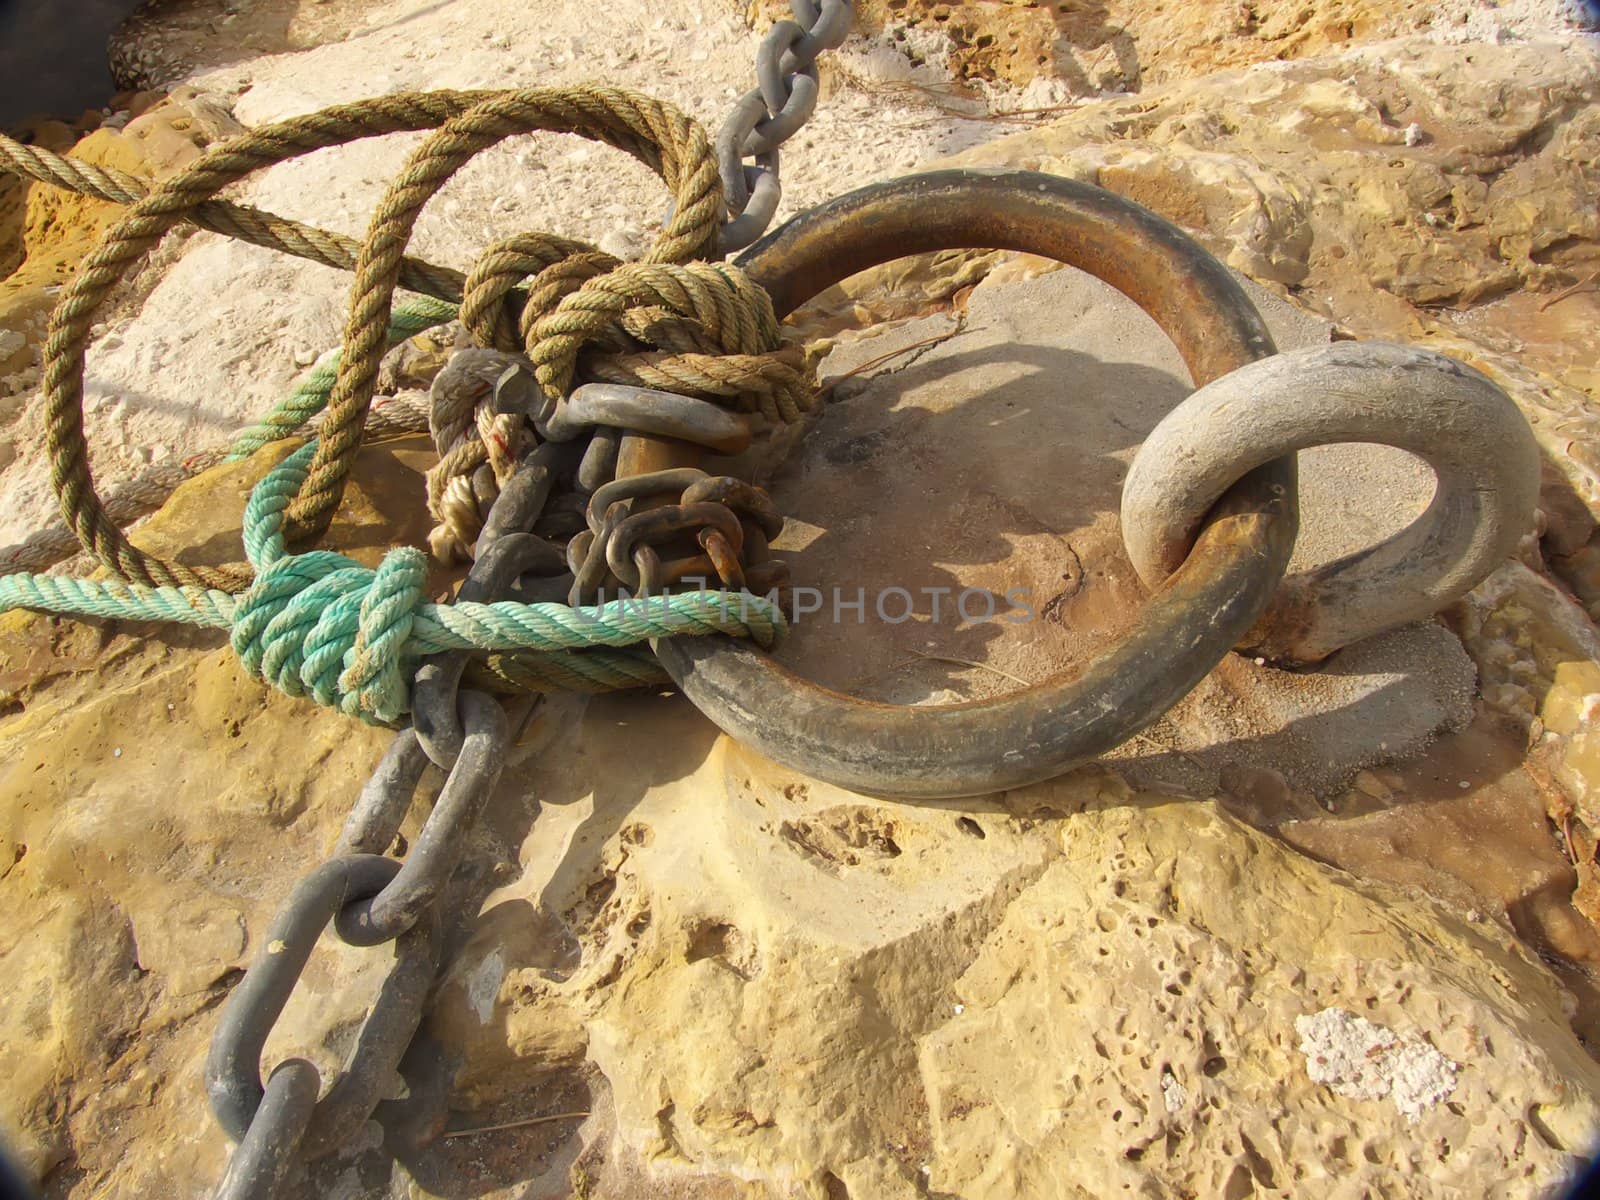 close-up image of a chain and rope mooring